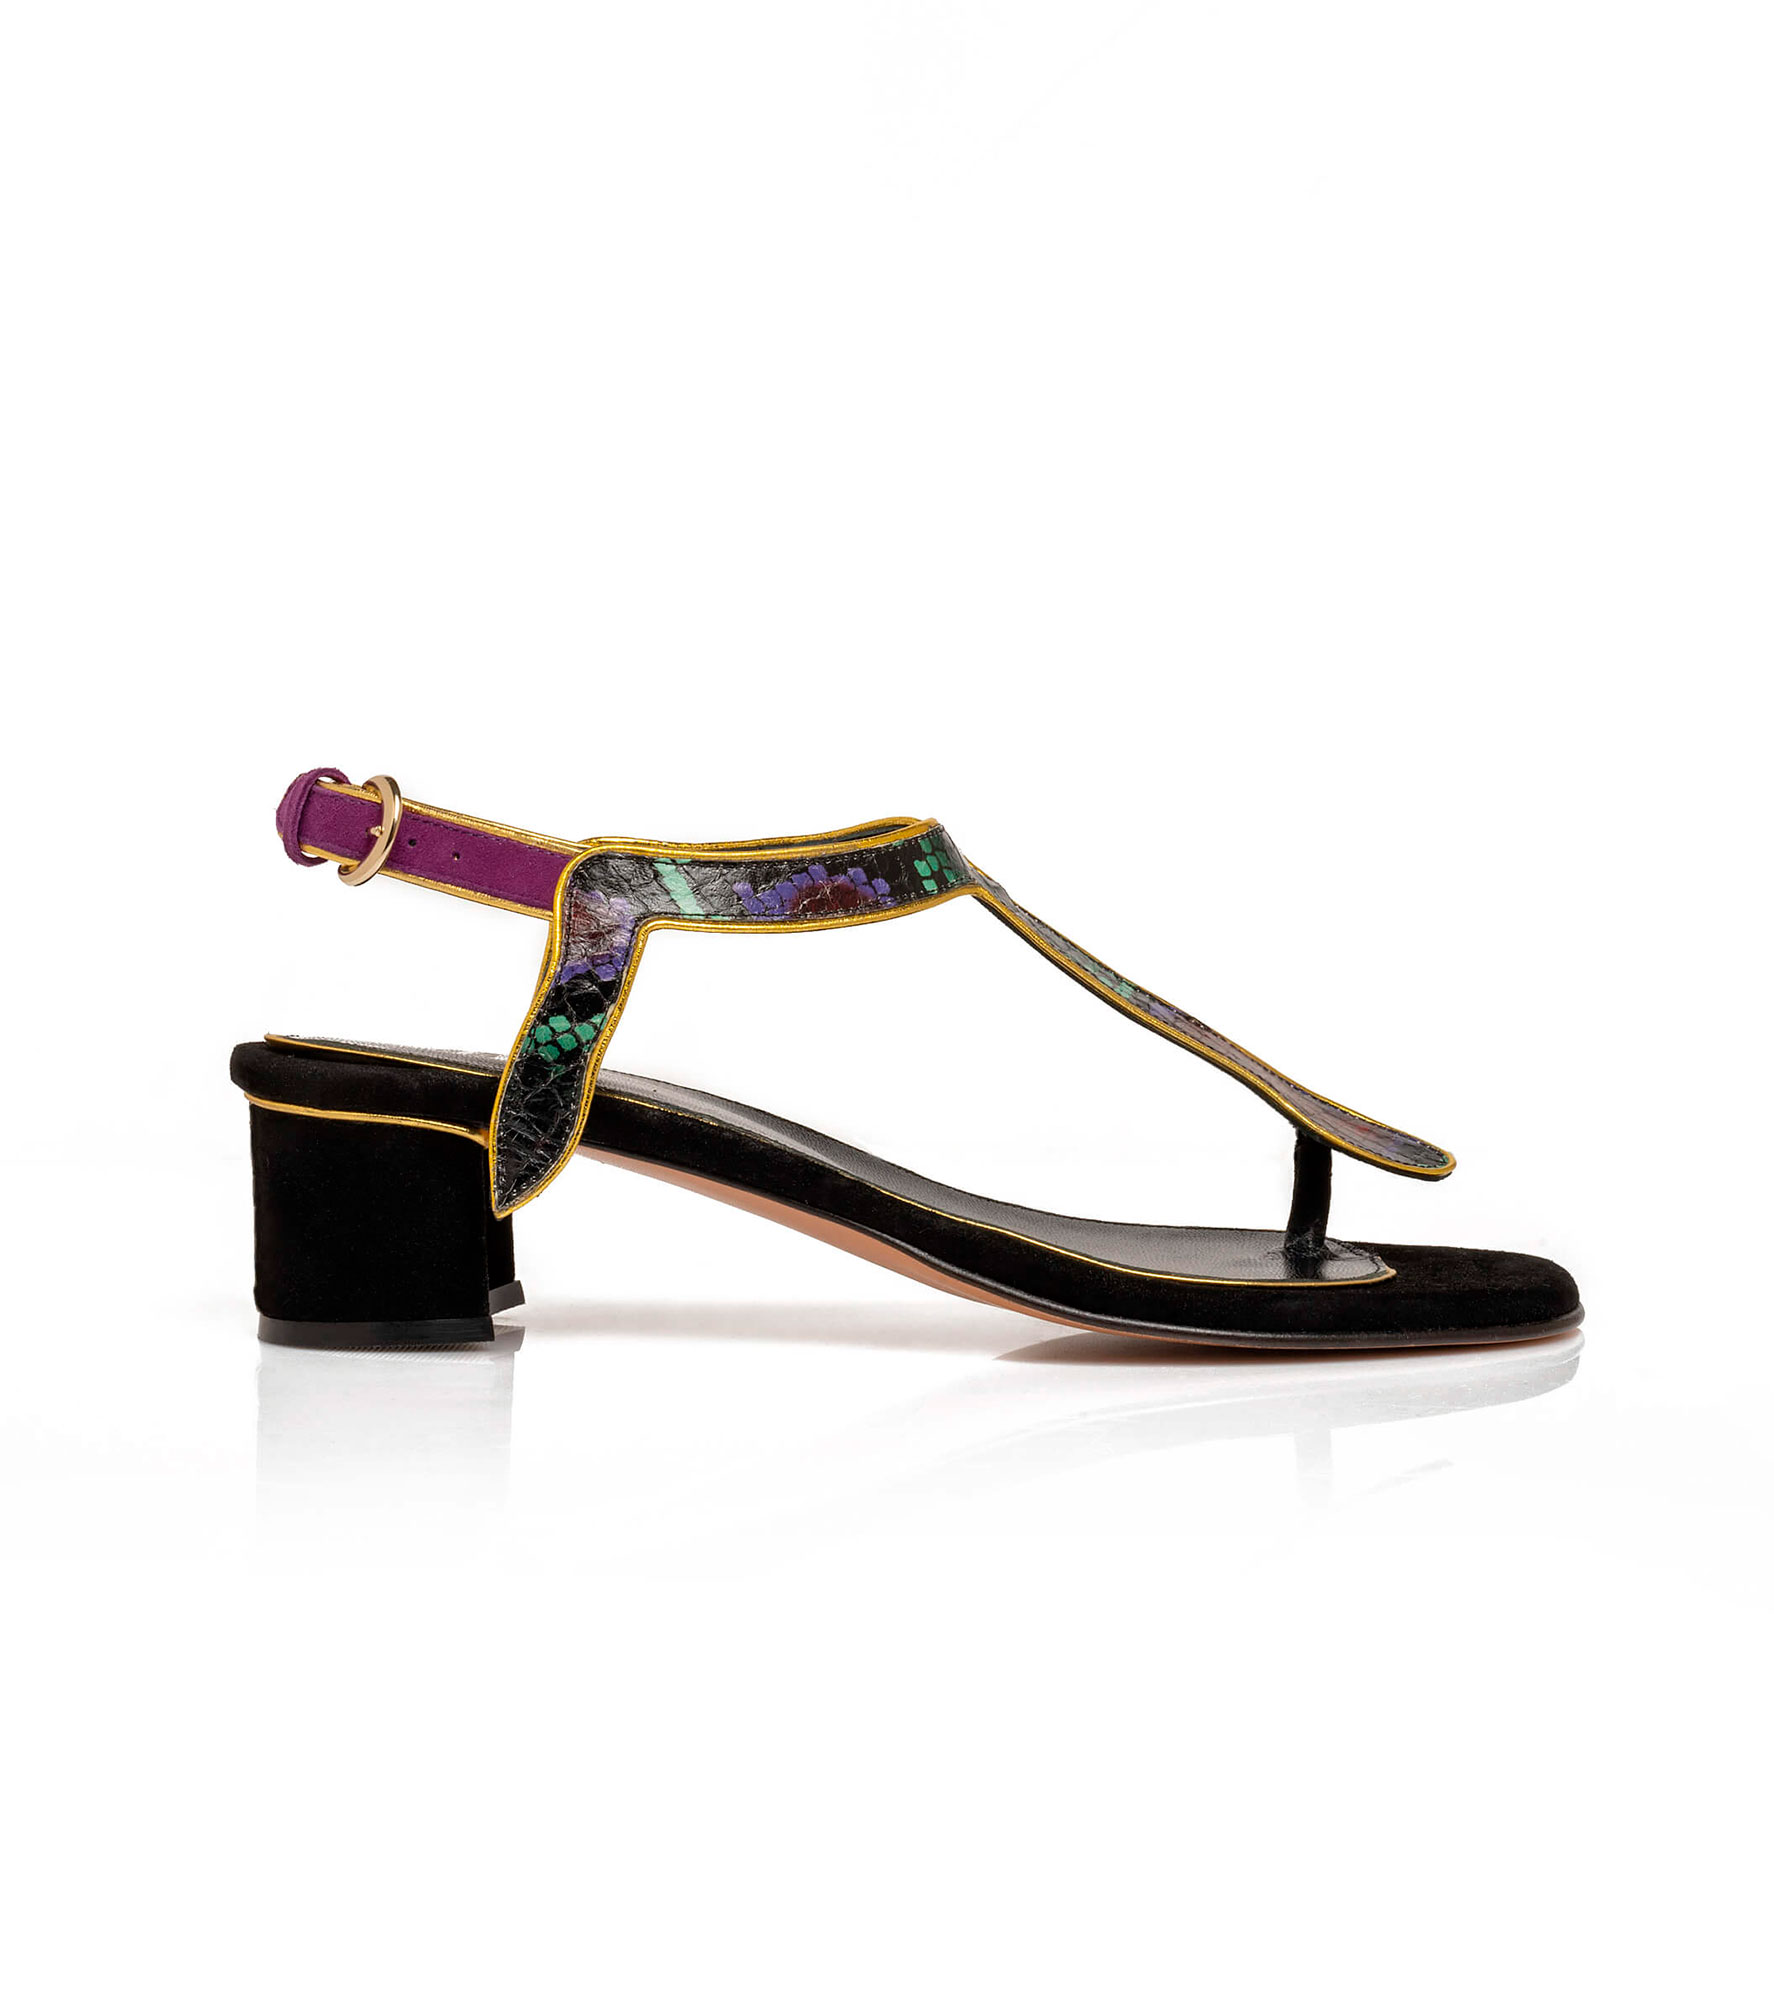 Our iconic RANIA KROUPI Ladon sandals in a limited production with colorful snake. Inspired by Ladon, the snake – dragon guardian of the golden apples. An eye catching masterpiece of craftmanship, it actually represents "Ladon", a minimally designed serpent with its tail to goes of out of the sole. A world first , where the design extends out of the sole. Our almost bare sensual sandal is handcrafted in Athens with a luxe handcrafted and handstitched gold leather finishing, an ultimate touch of quite luxury. Show off yours in your vacations, cruise moments or in the city-official happenings with a cocktail dress or even with cropped pants or shorts!